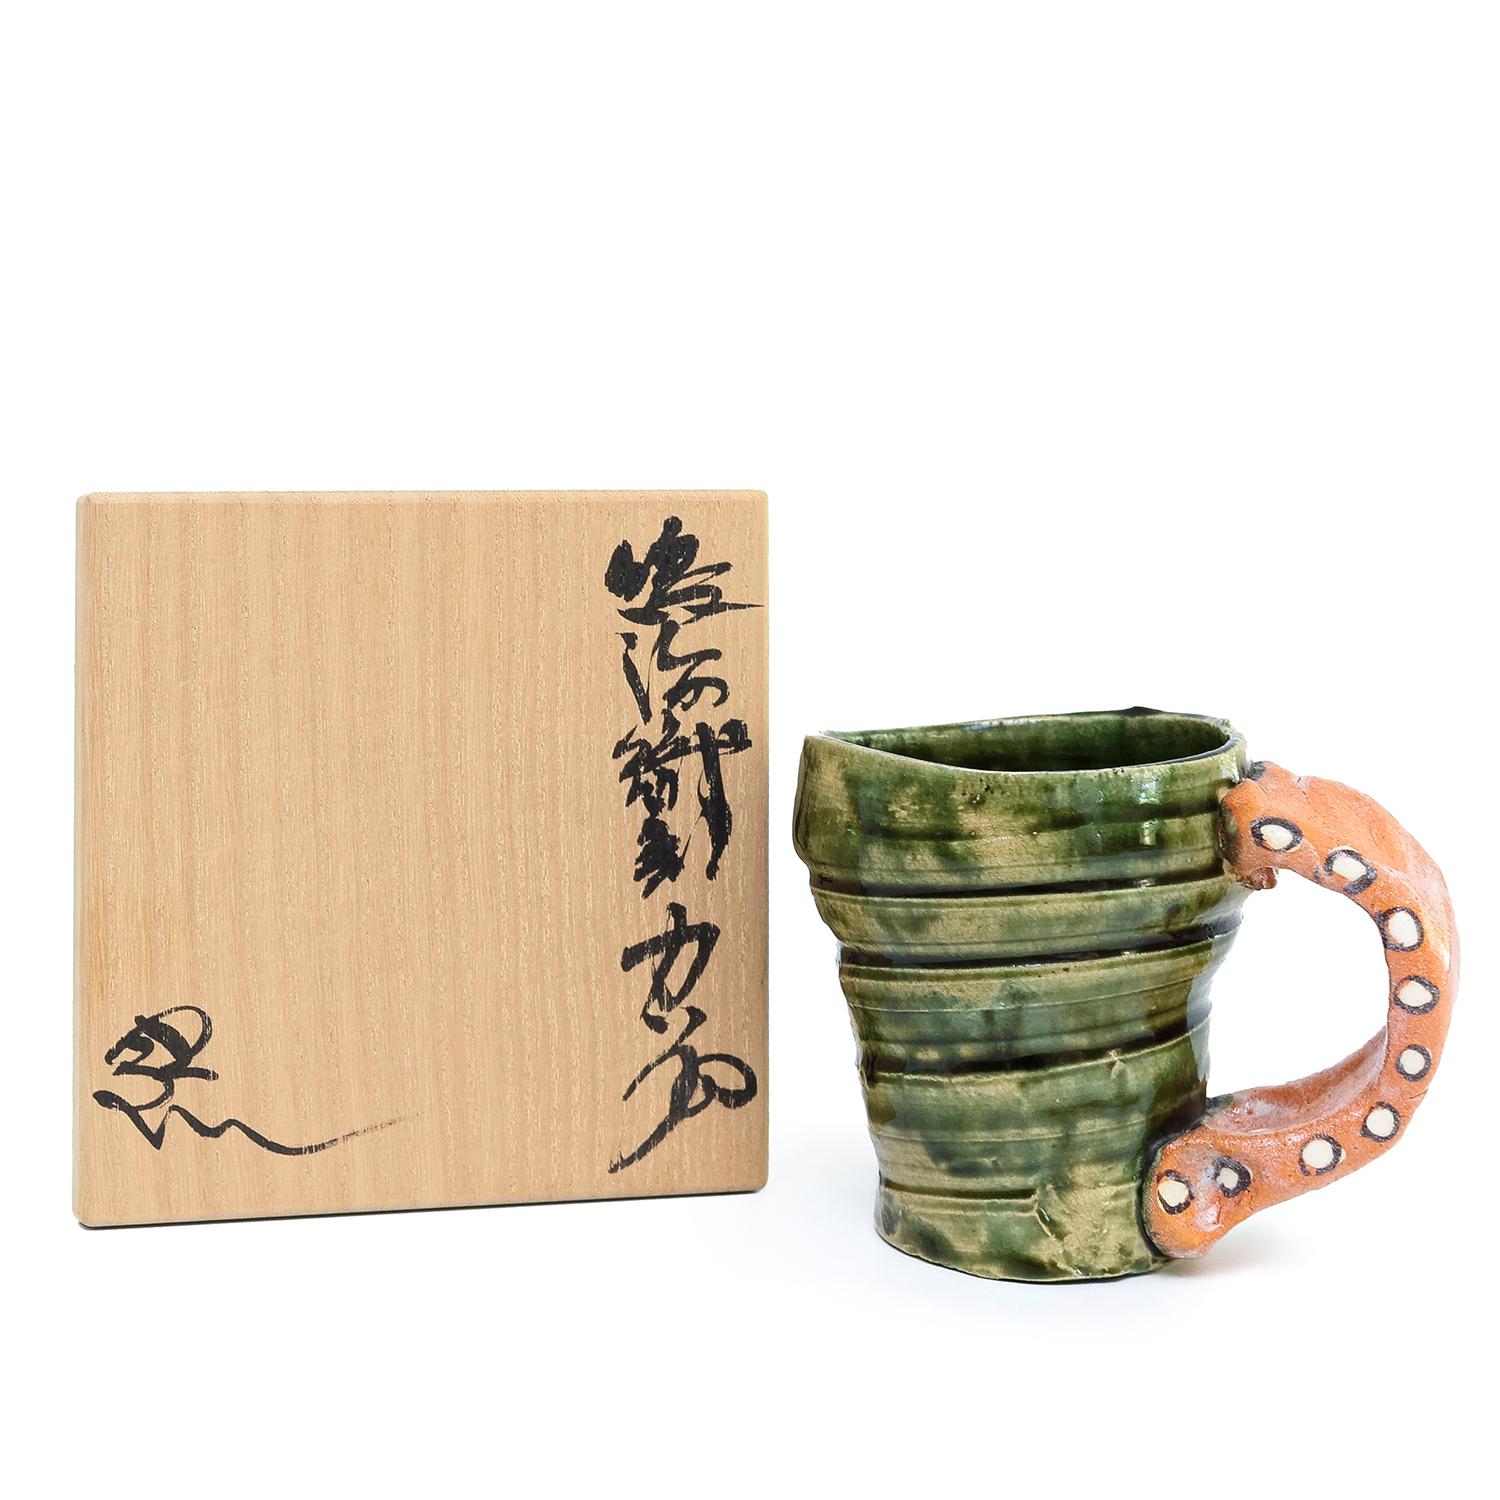 Suzuki Goro - Oribe Mug
stoneware, underglaze and glaze
3.75 x 5 x 3.5”
date unknown 
signed
comes with a signed wooden box

BIO- 
Revered Japanese ceramic master Goro Suzuki has had a long, successful career, beginning as a production potter and